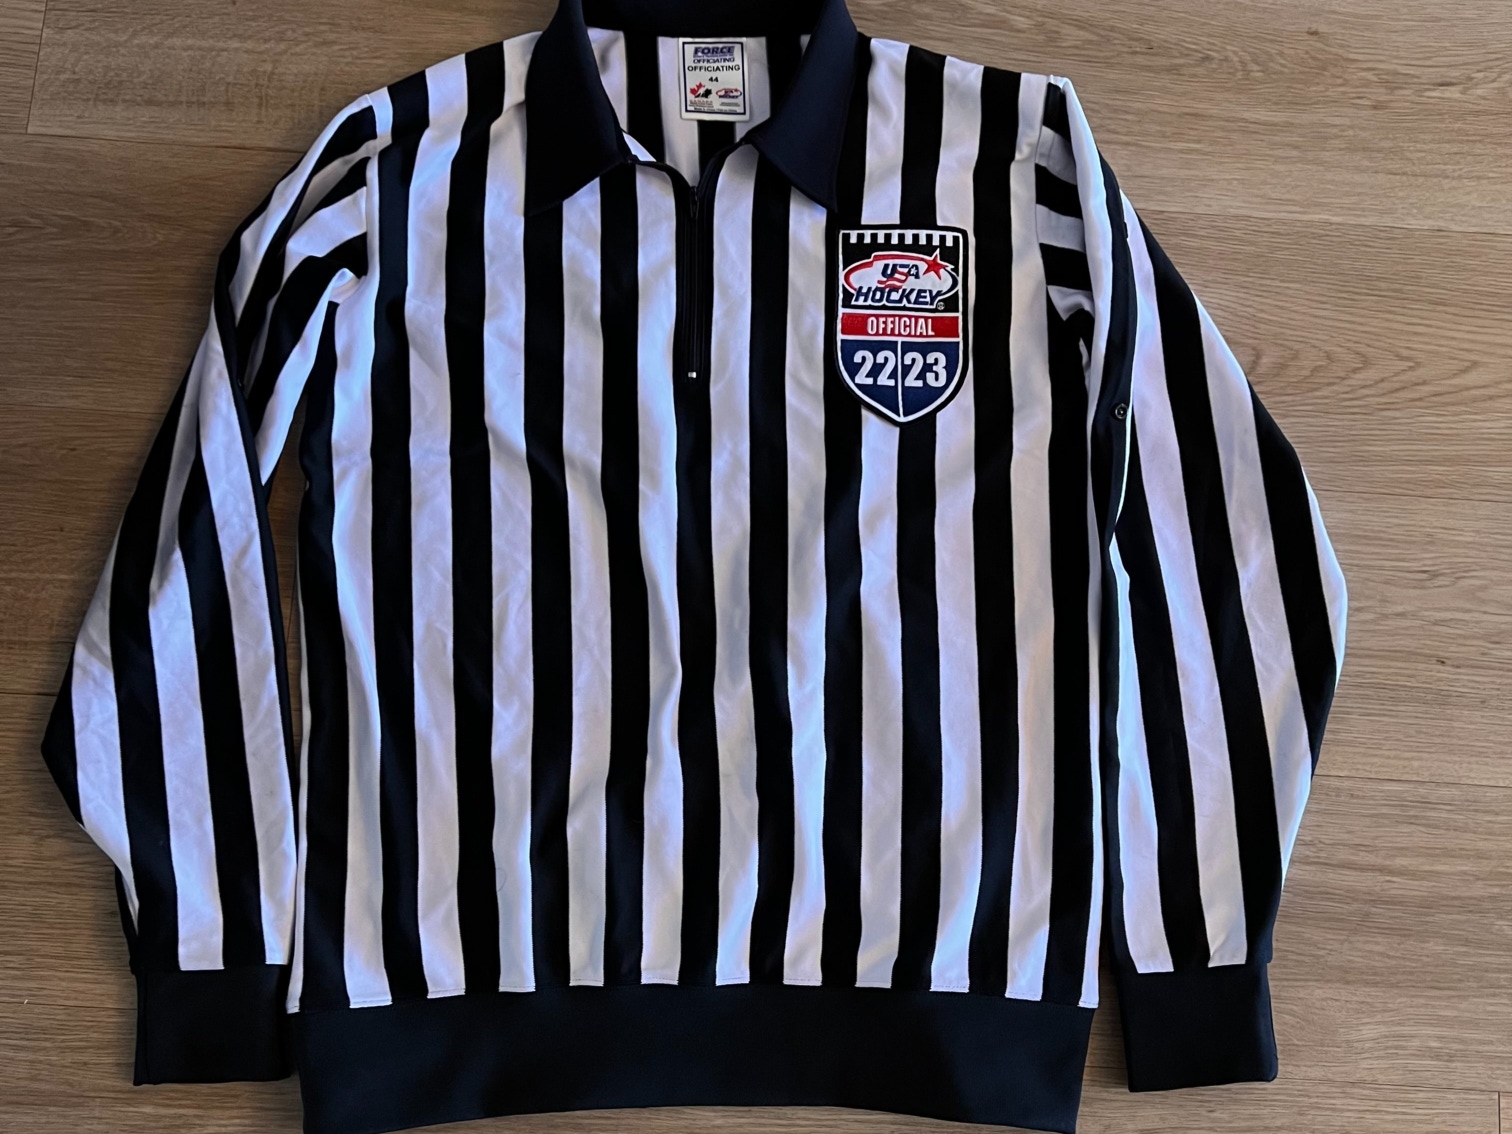 Force Officiating Referee jersey